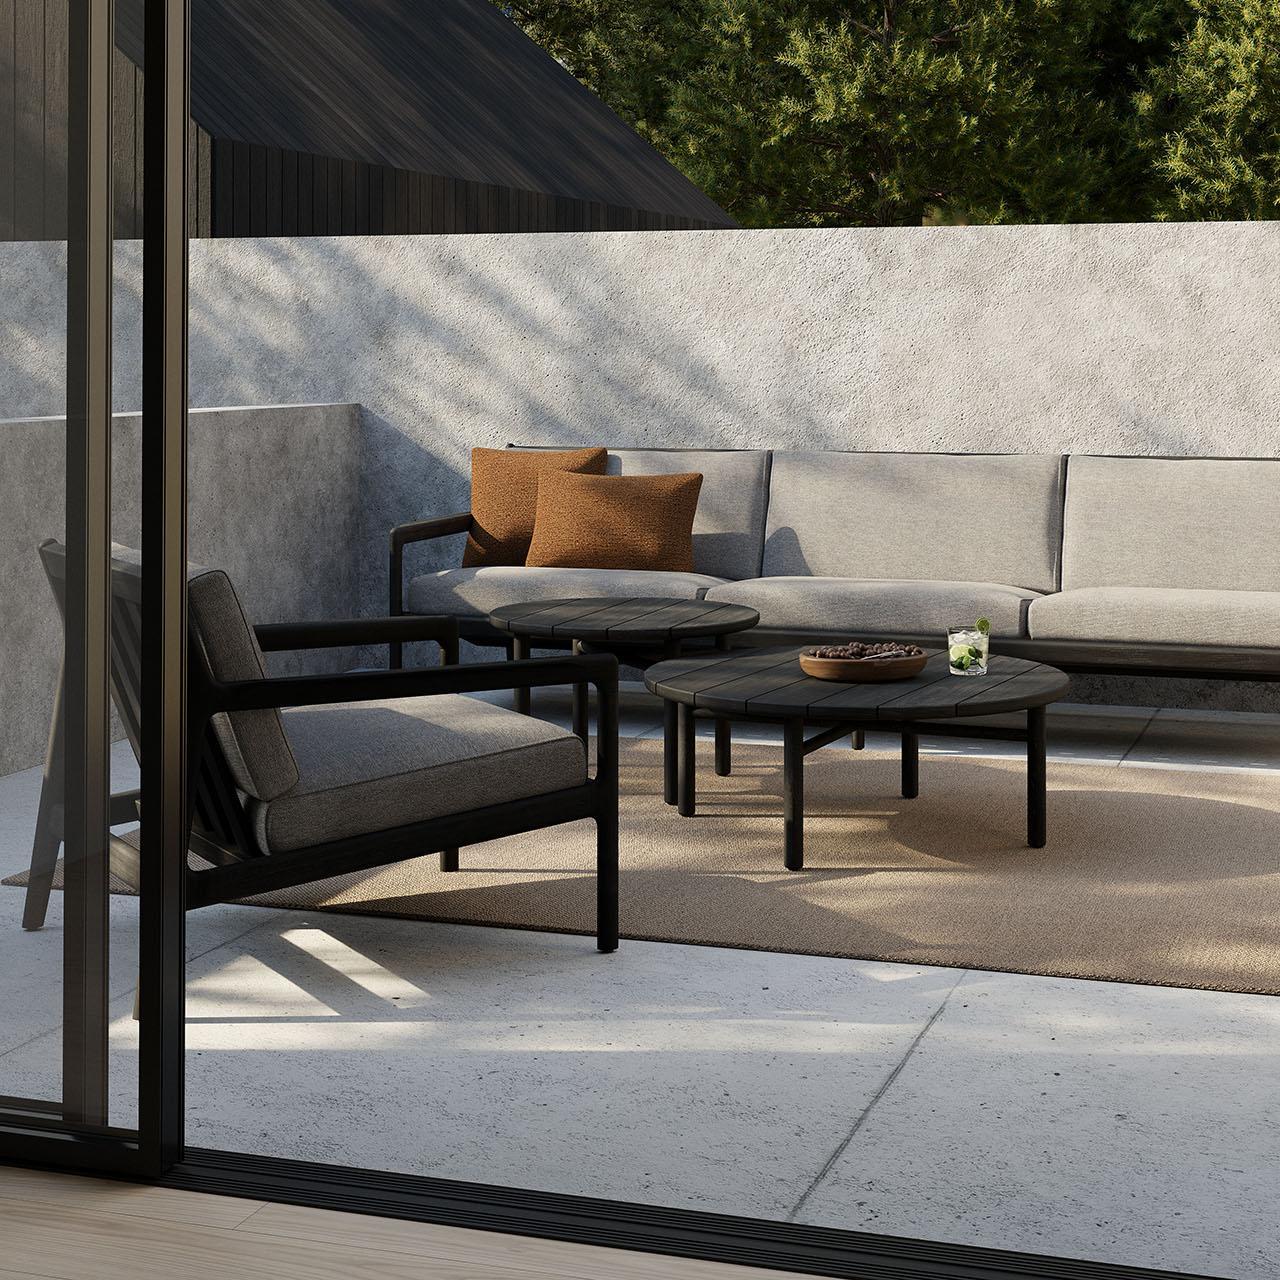 Live Light | Design your new outdoor lounge by renting furniture with Live Light